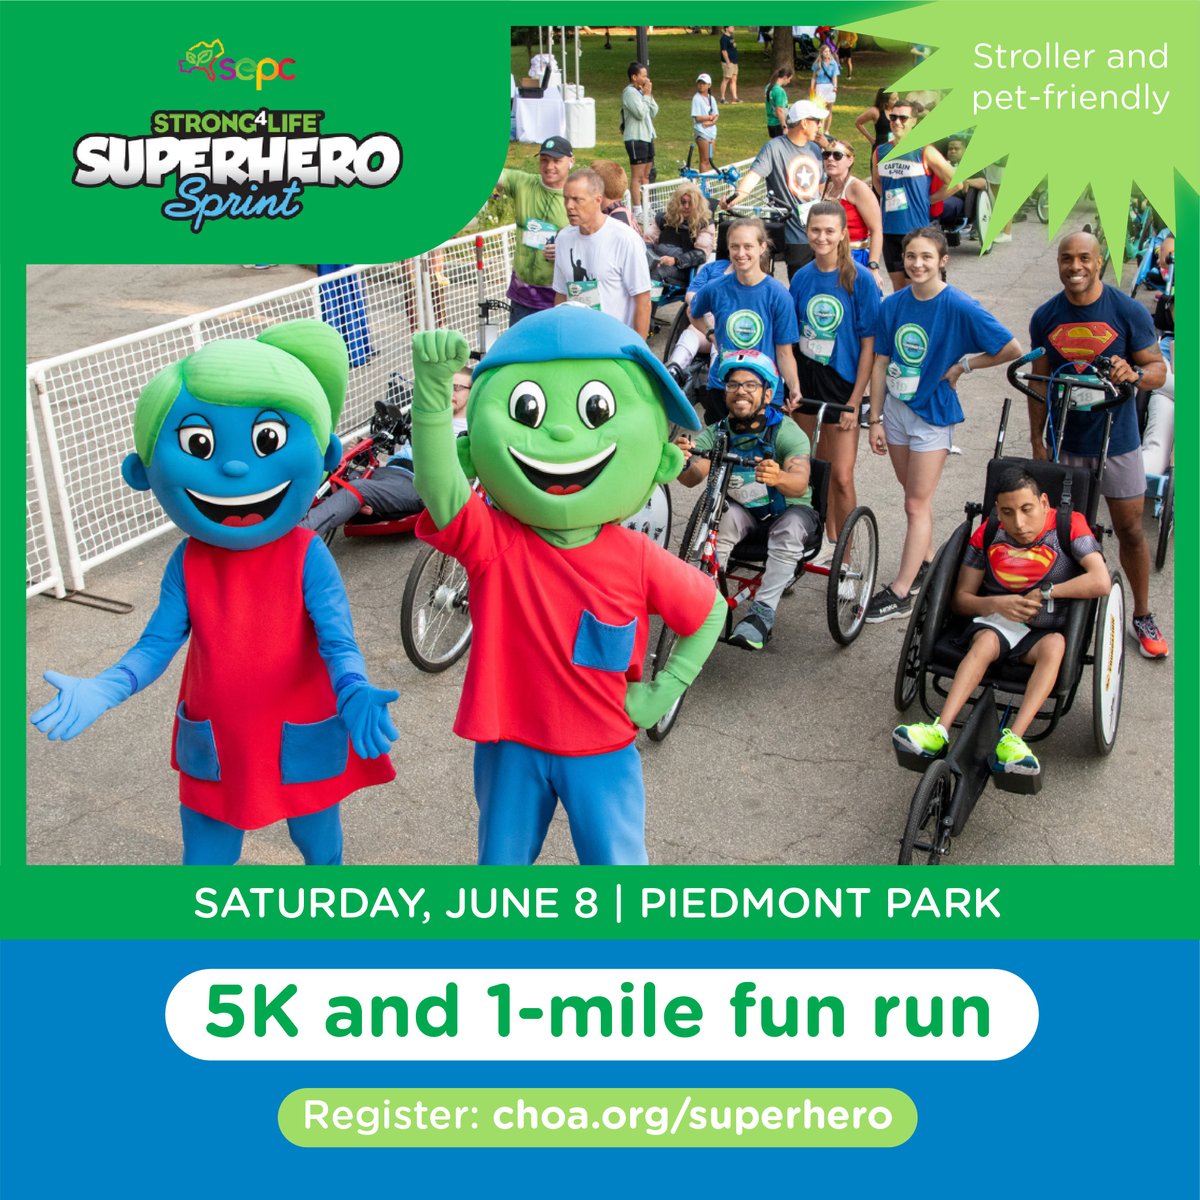 Use your superpowers to walk, run, roll, sprint or fly to the finish line at our annual Strong4Life Superhero Sprint 5K and 1-mile fun run! 🦹 The event returns to @piedmontpark for its 12th year on Saturday, June 8. To learn more and register, visit choa.org/superhero. 💚